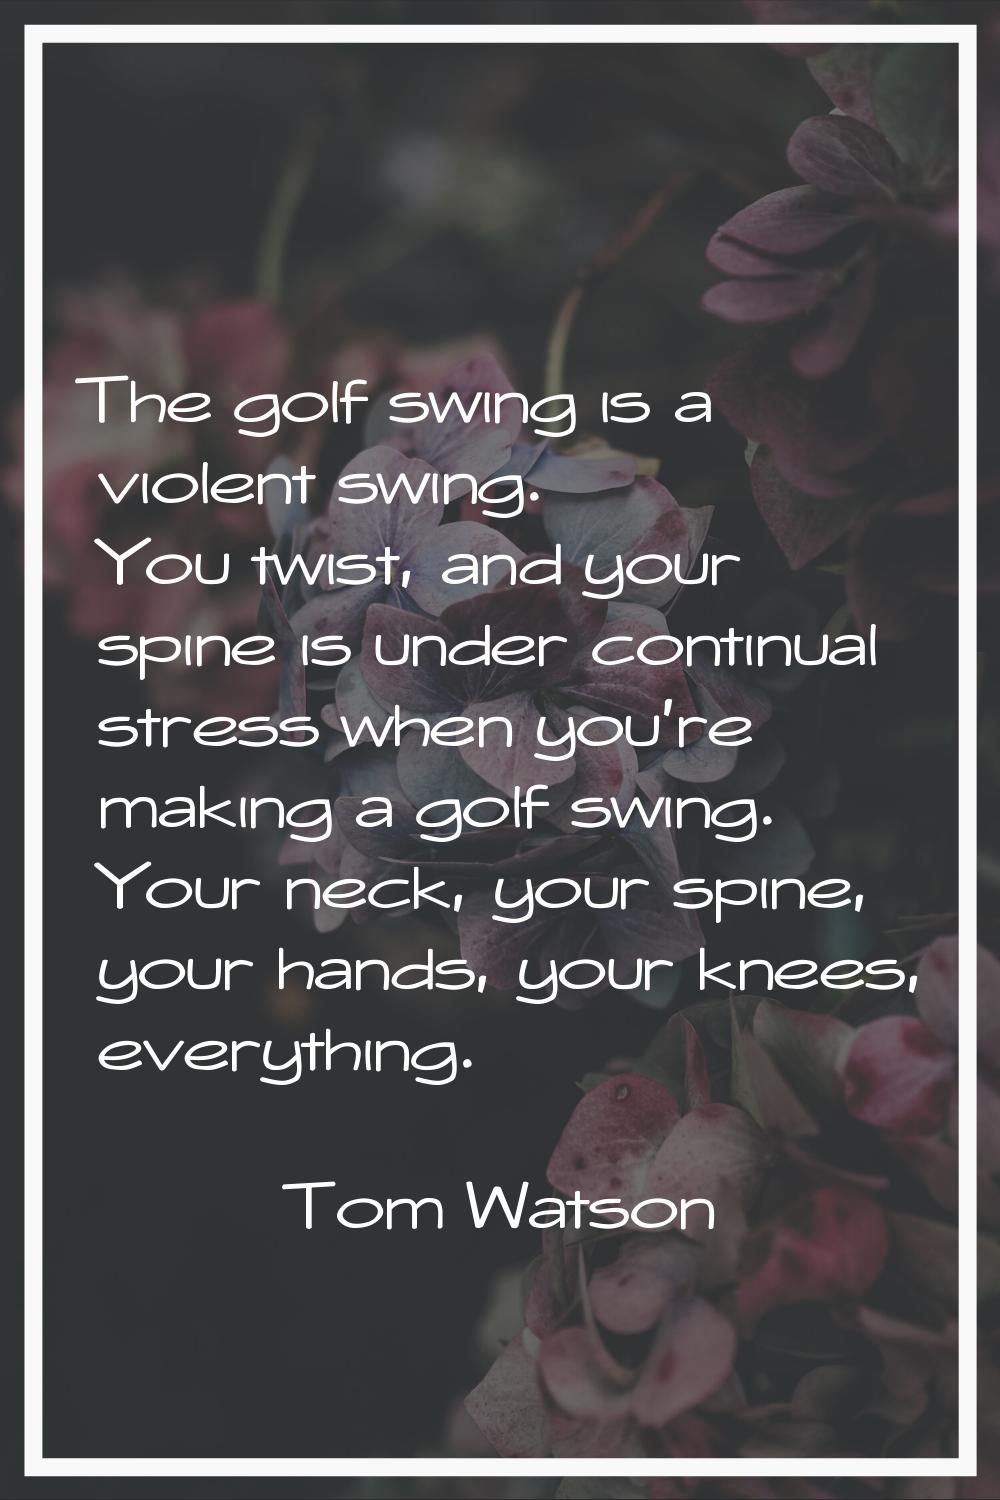 The golf swing is a violent swing. You twist, and your spine is under continual stress when you're 